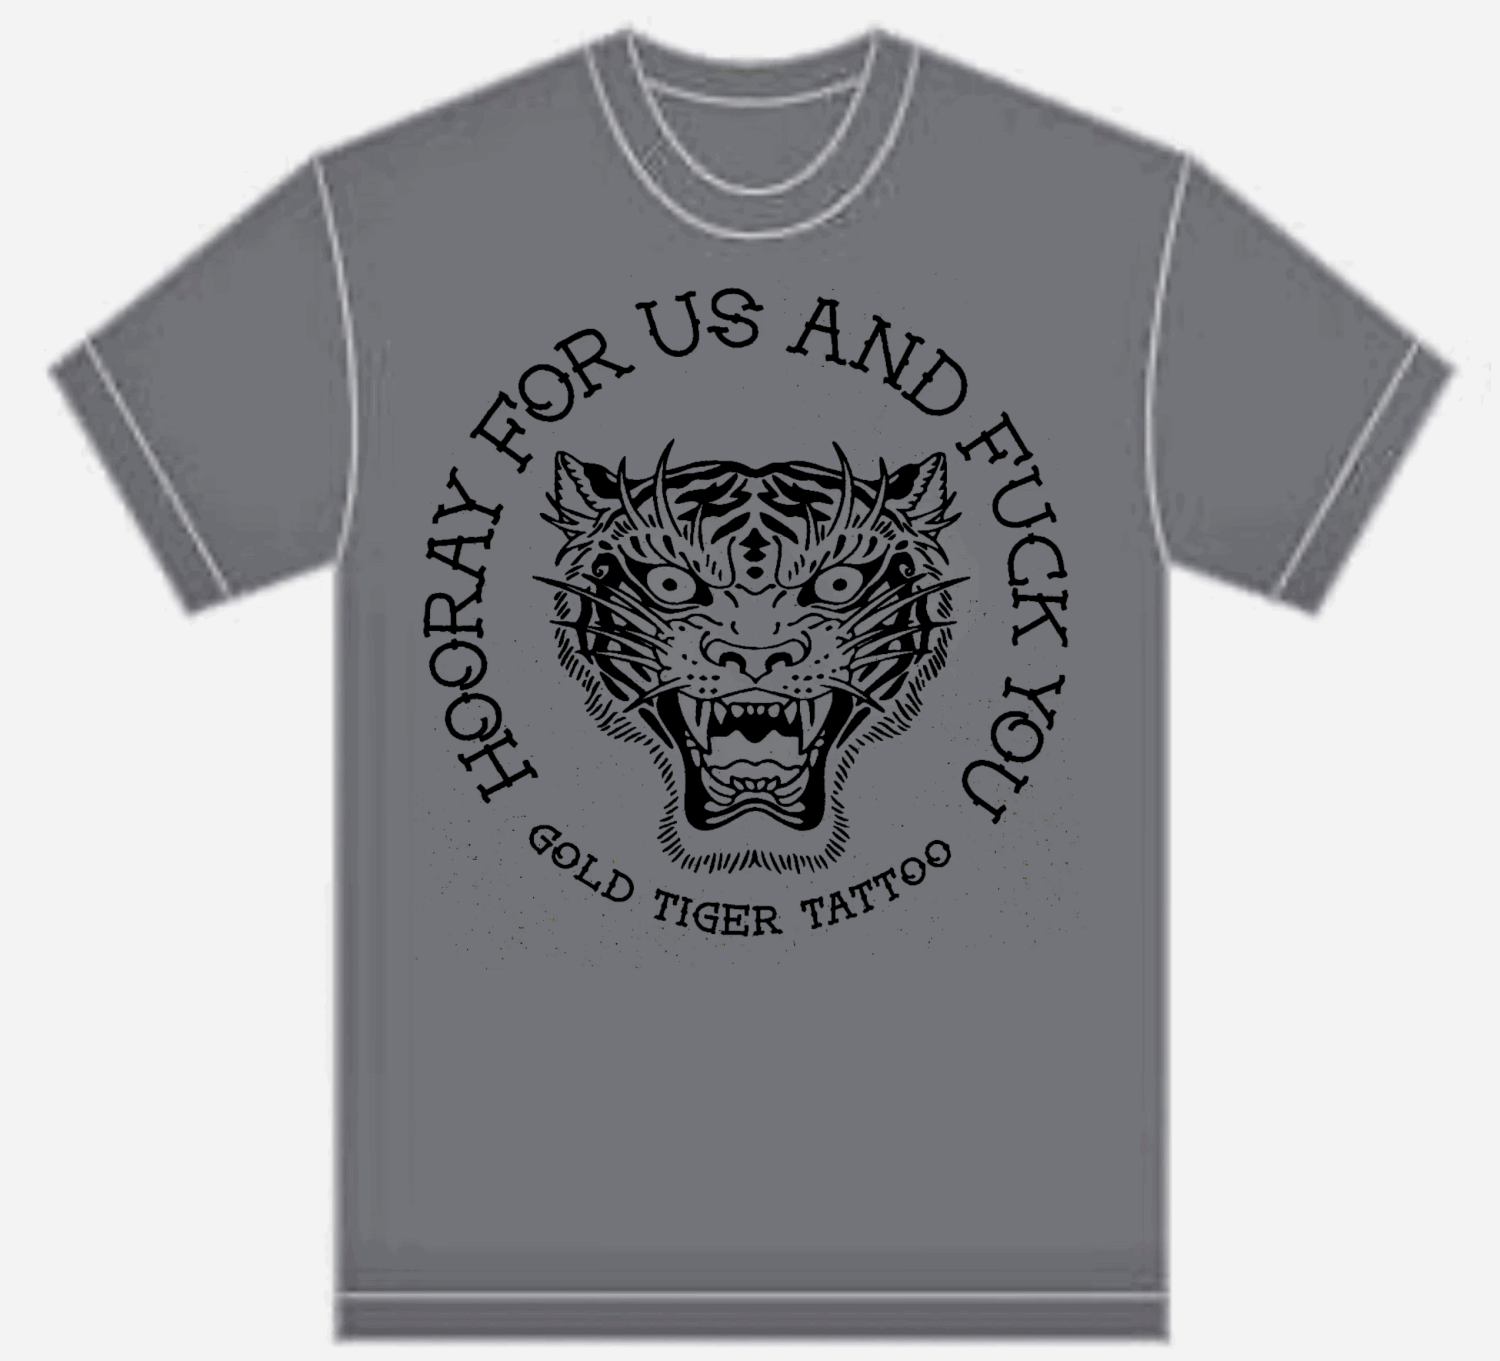 Grey T Hooray for us and F**k you — GOLD TIGER TATTOO